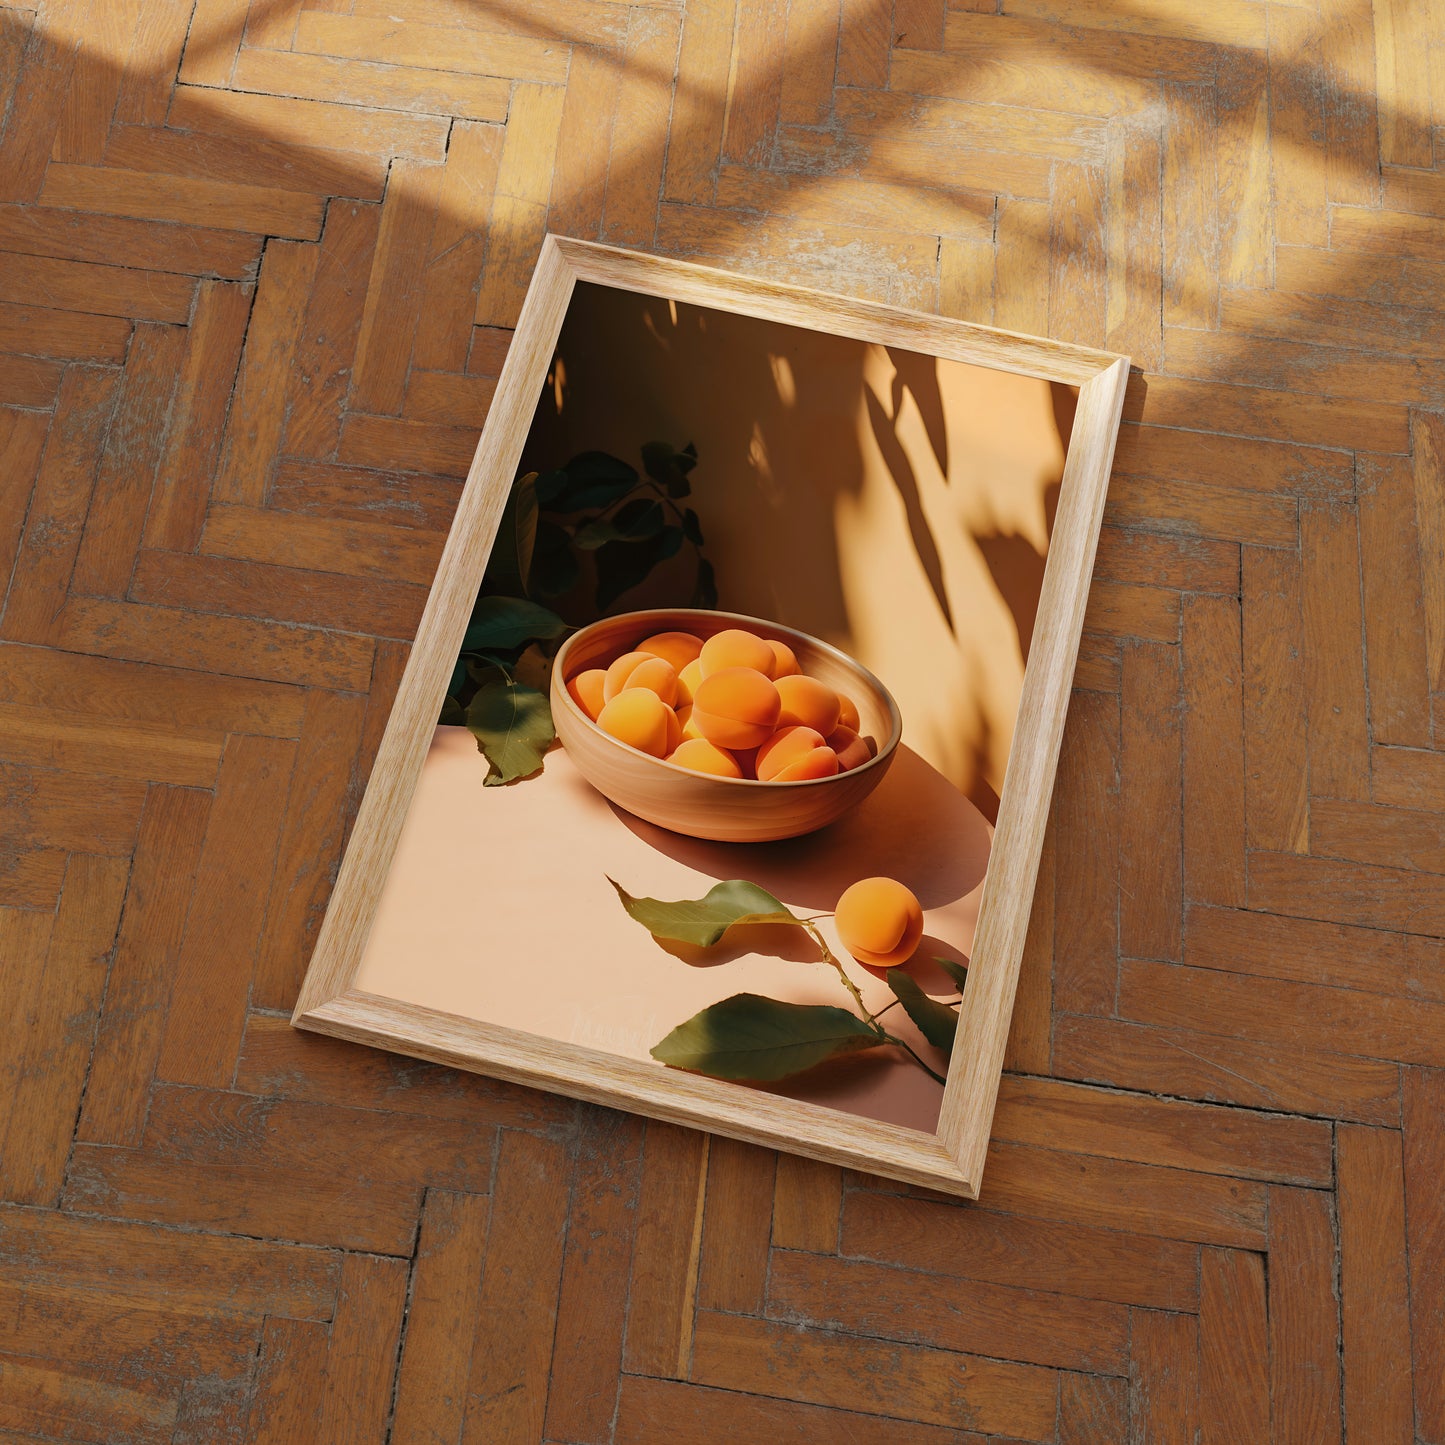 A wooden frame displaying a picture of apricots in a bowl on a table, with shadows of leaves.